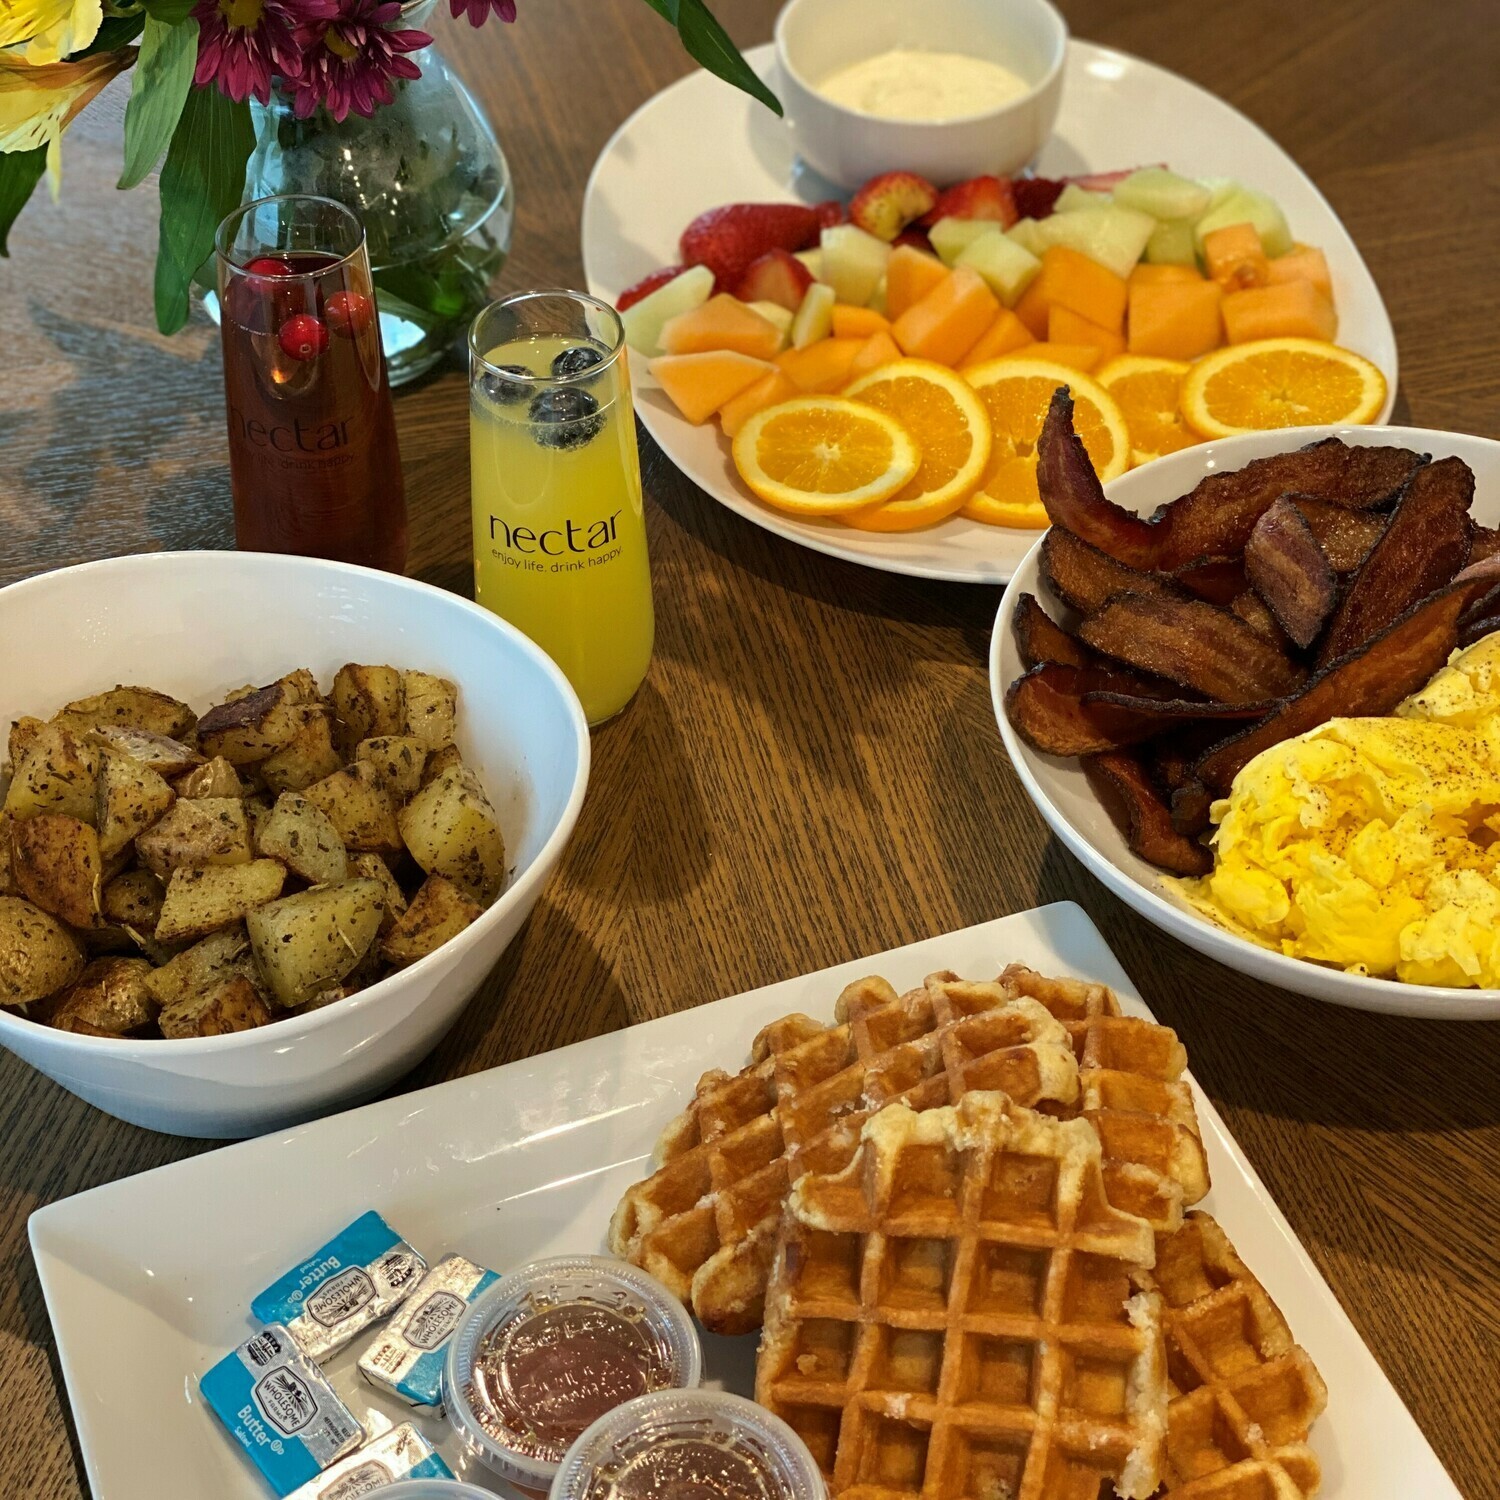 Mother's Day Events and Brunches in NH